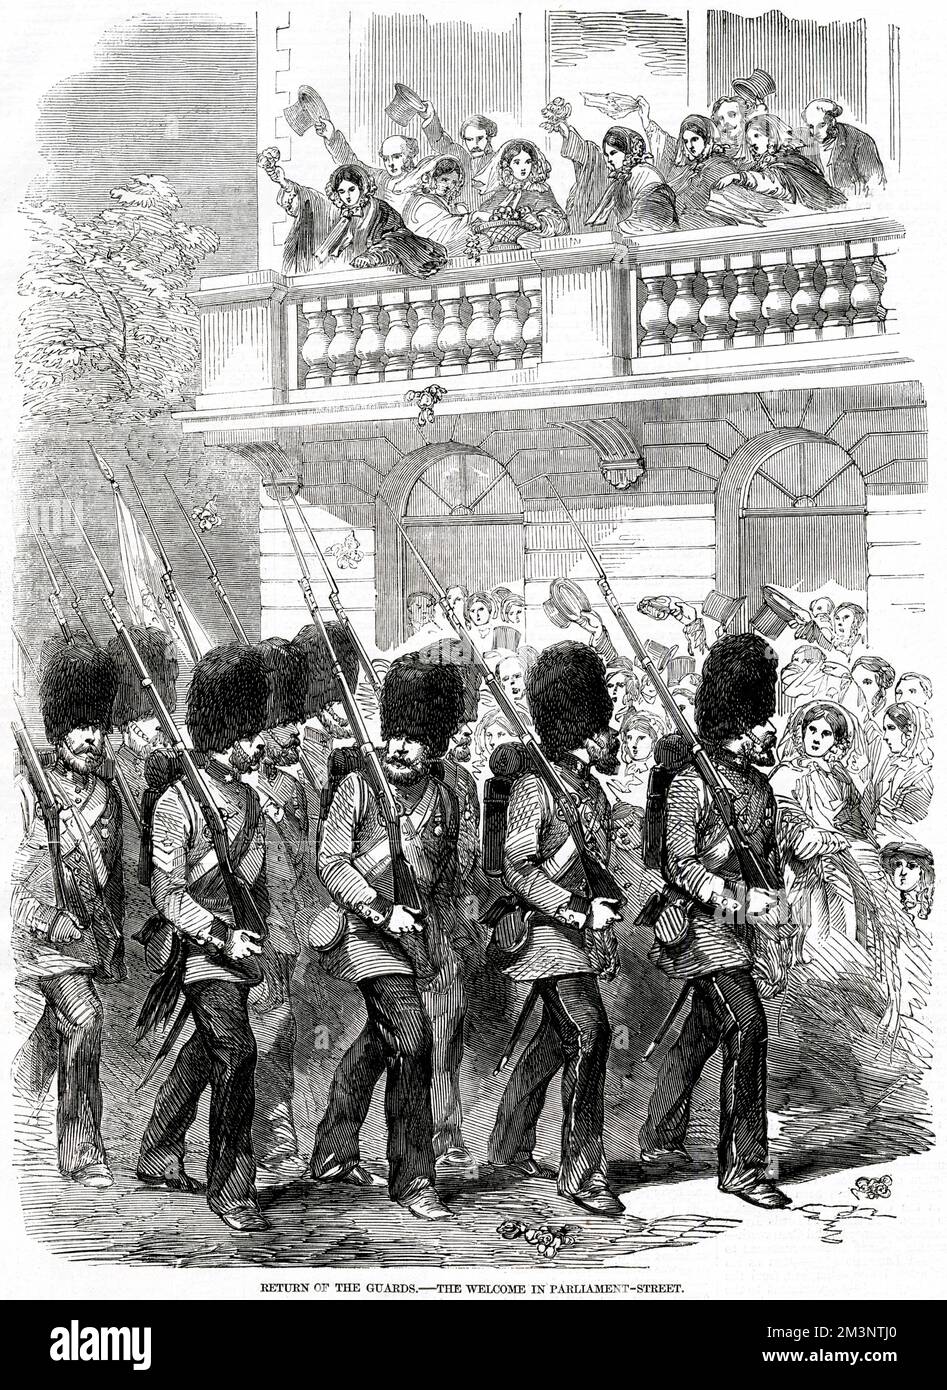 The return of the Guards from the Crimean War: the welcome in Parliament Street, London, where bouquets of flowers were thrown.     Date: 1856 Stock Photo